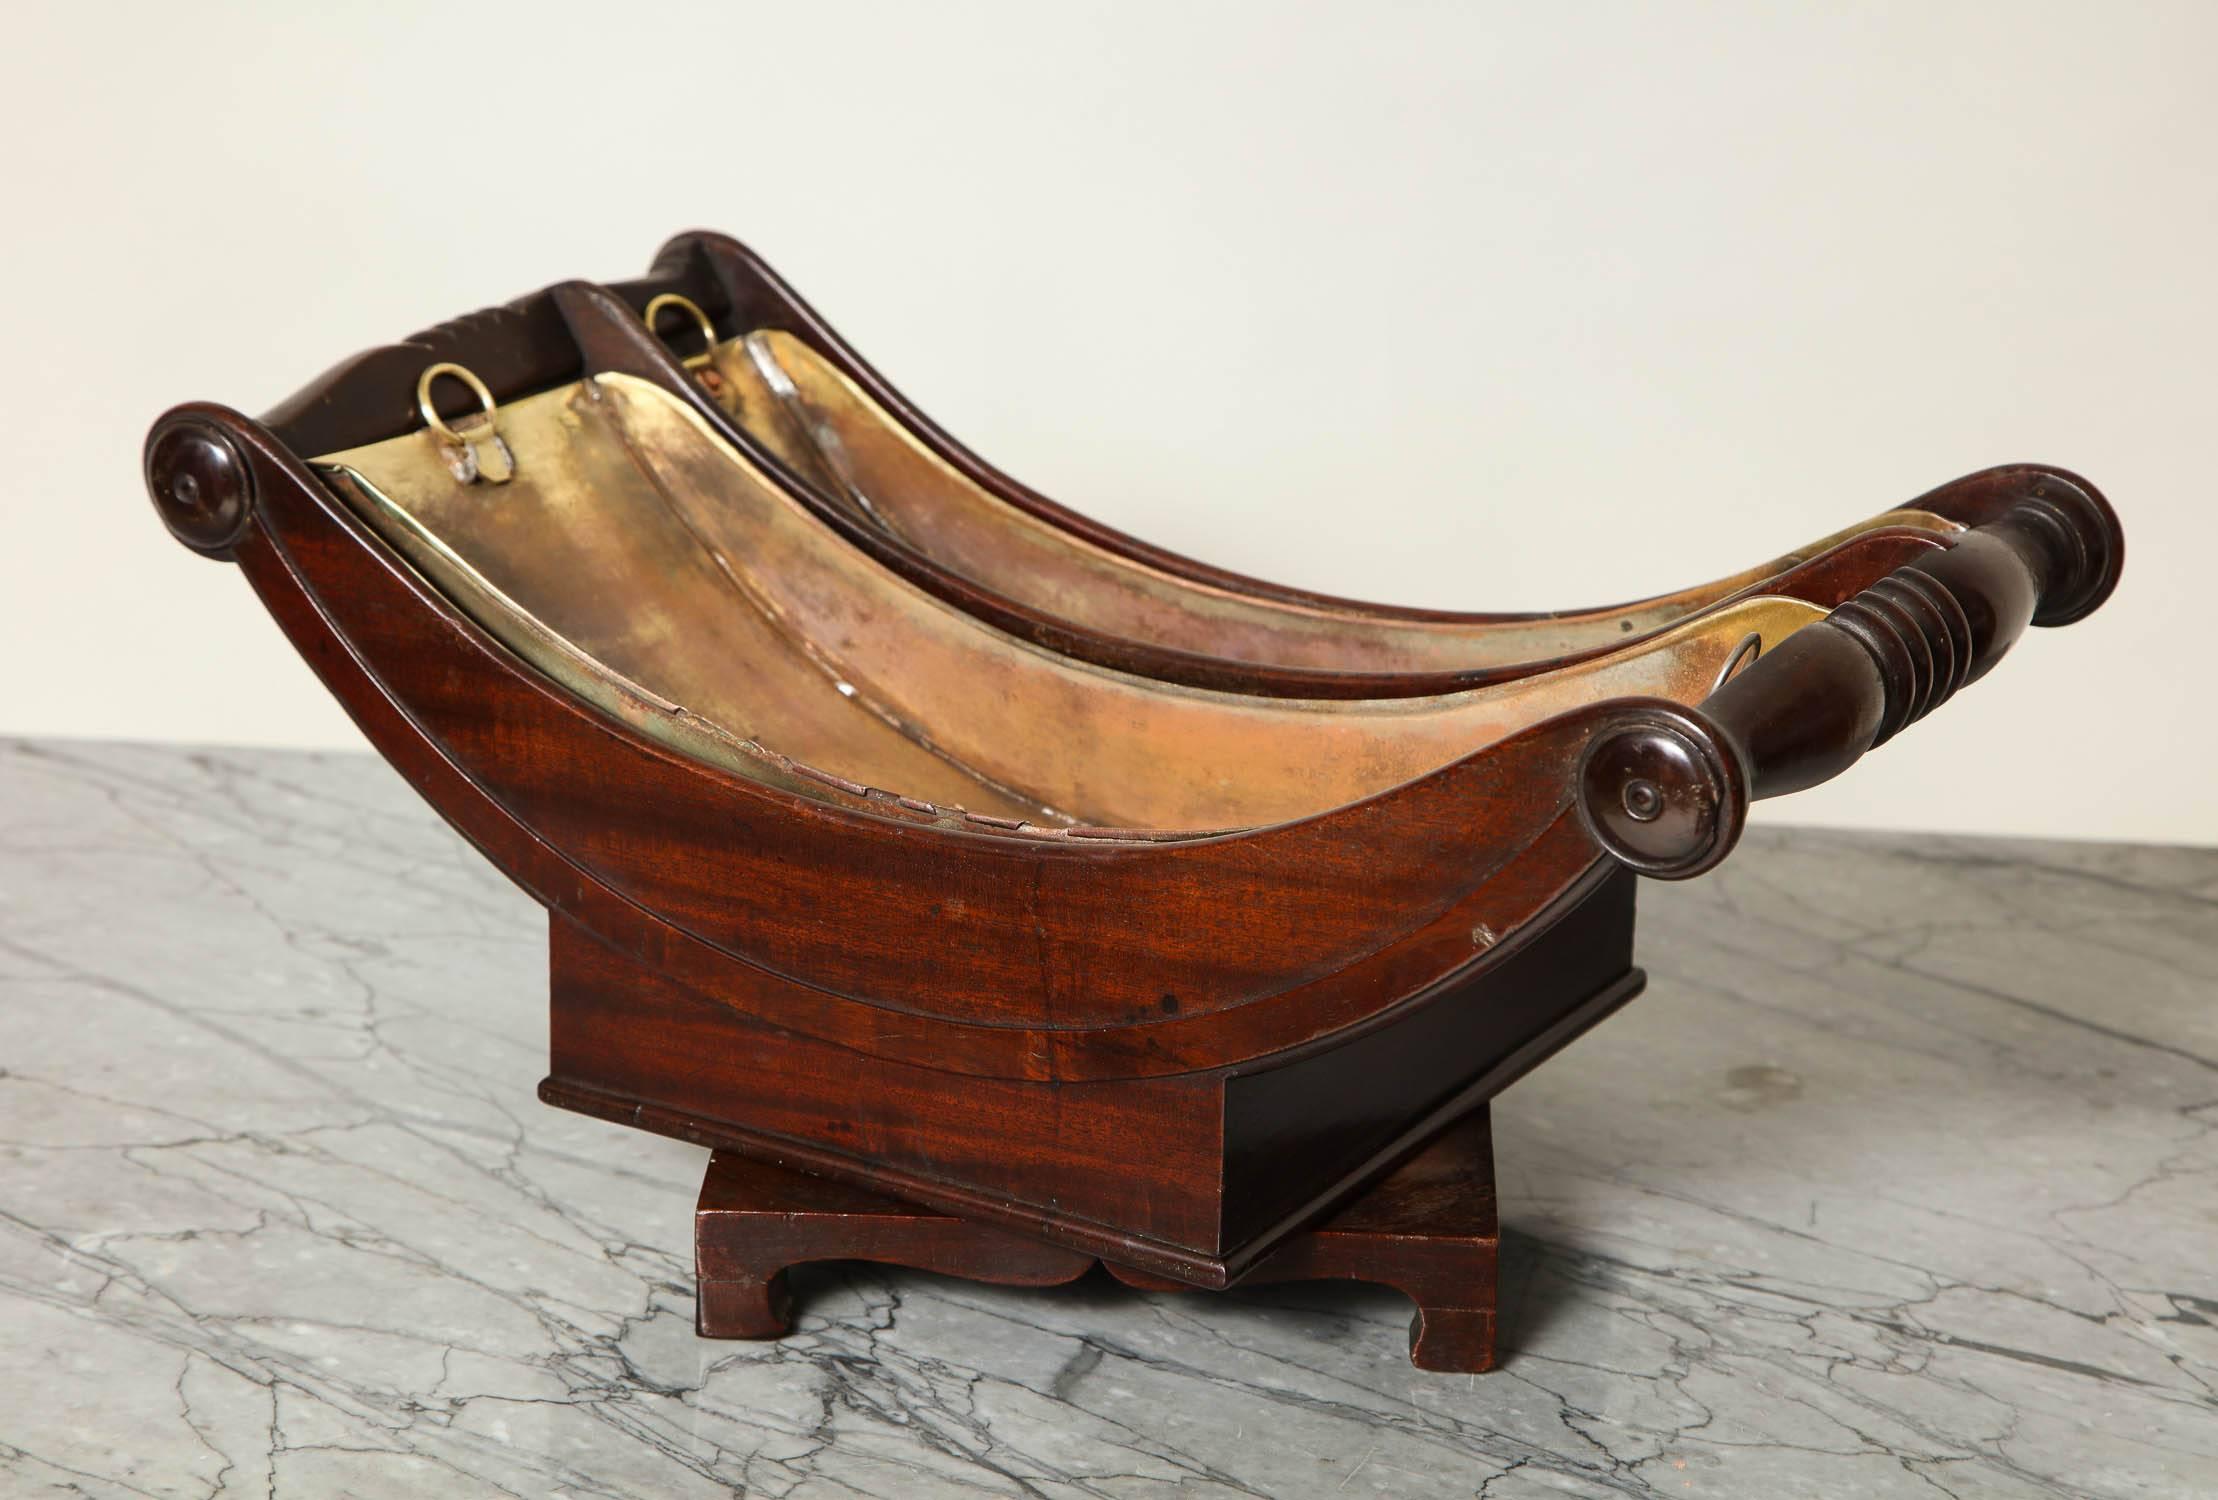 Very fine and rare George III mahogany divided Stilton cradle having bolster turned ends, original brass liners and standing on bracket base with original hand-forged iron bolt, the whole with good rich color and great form.